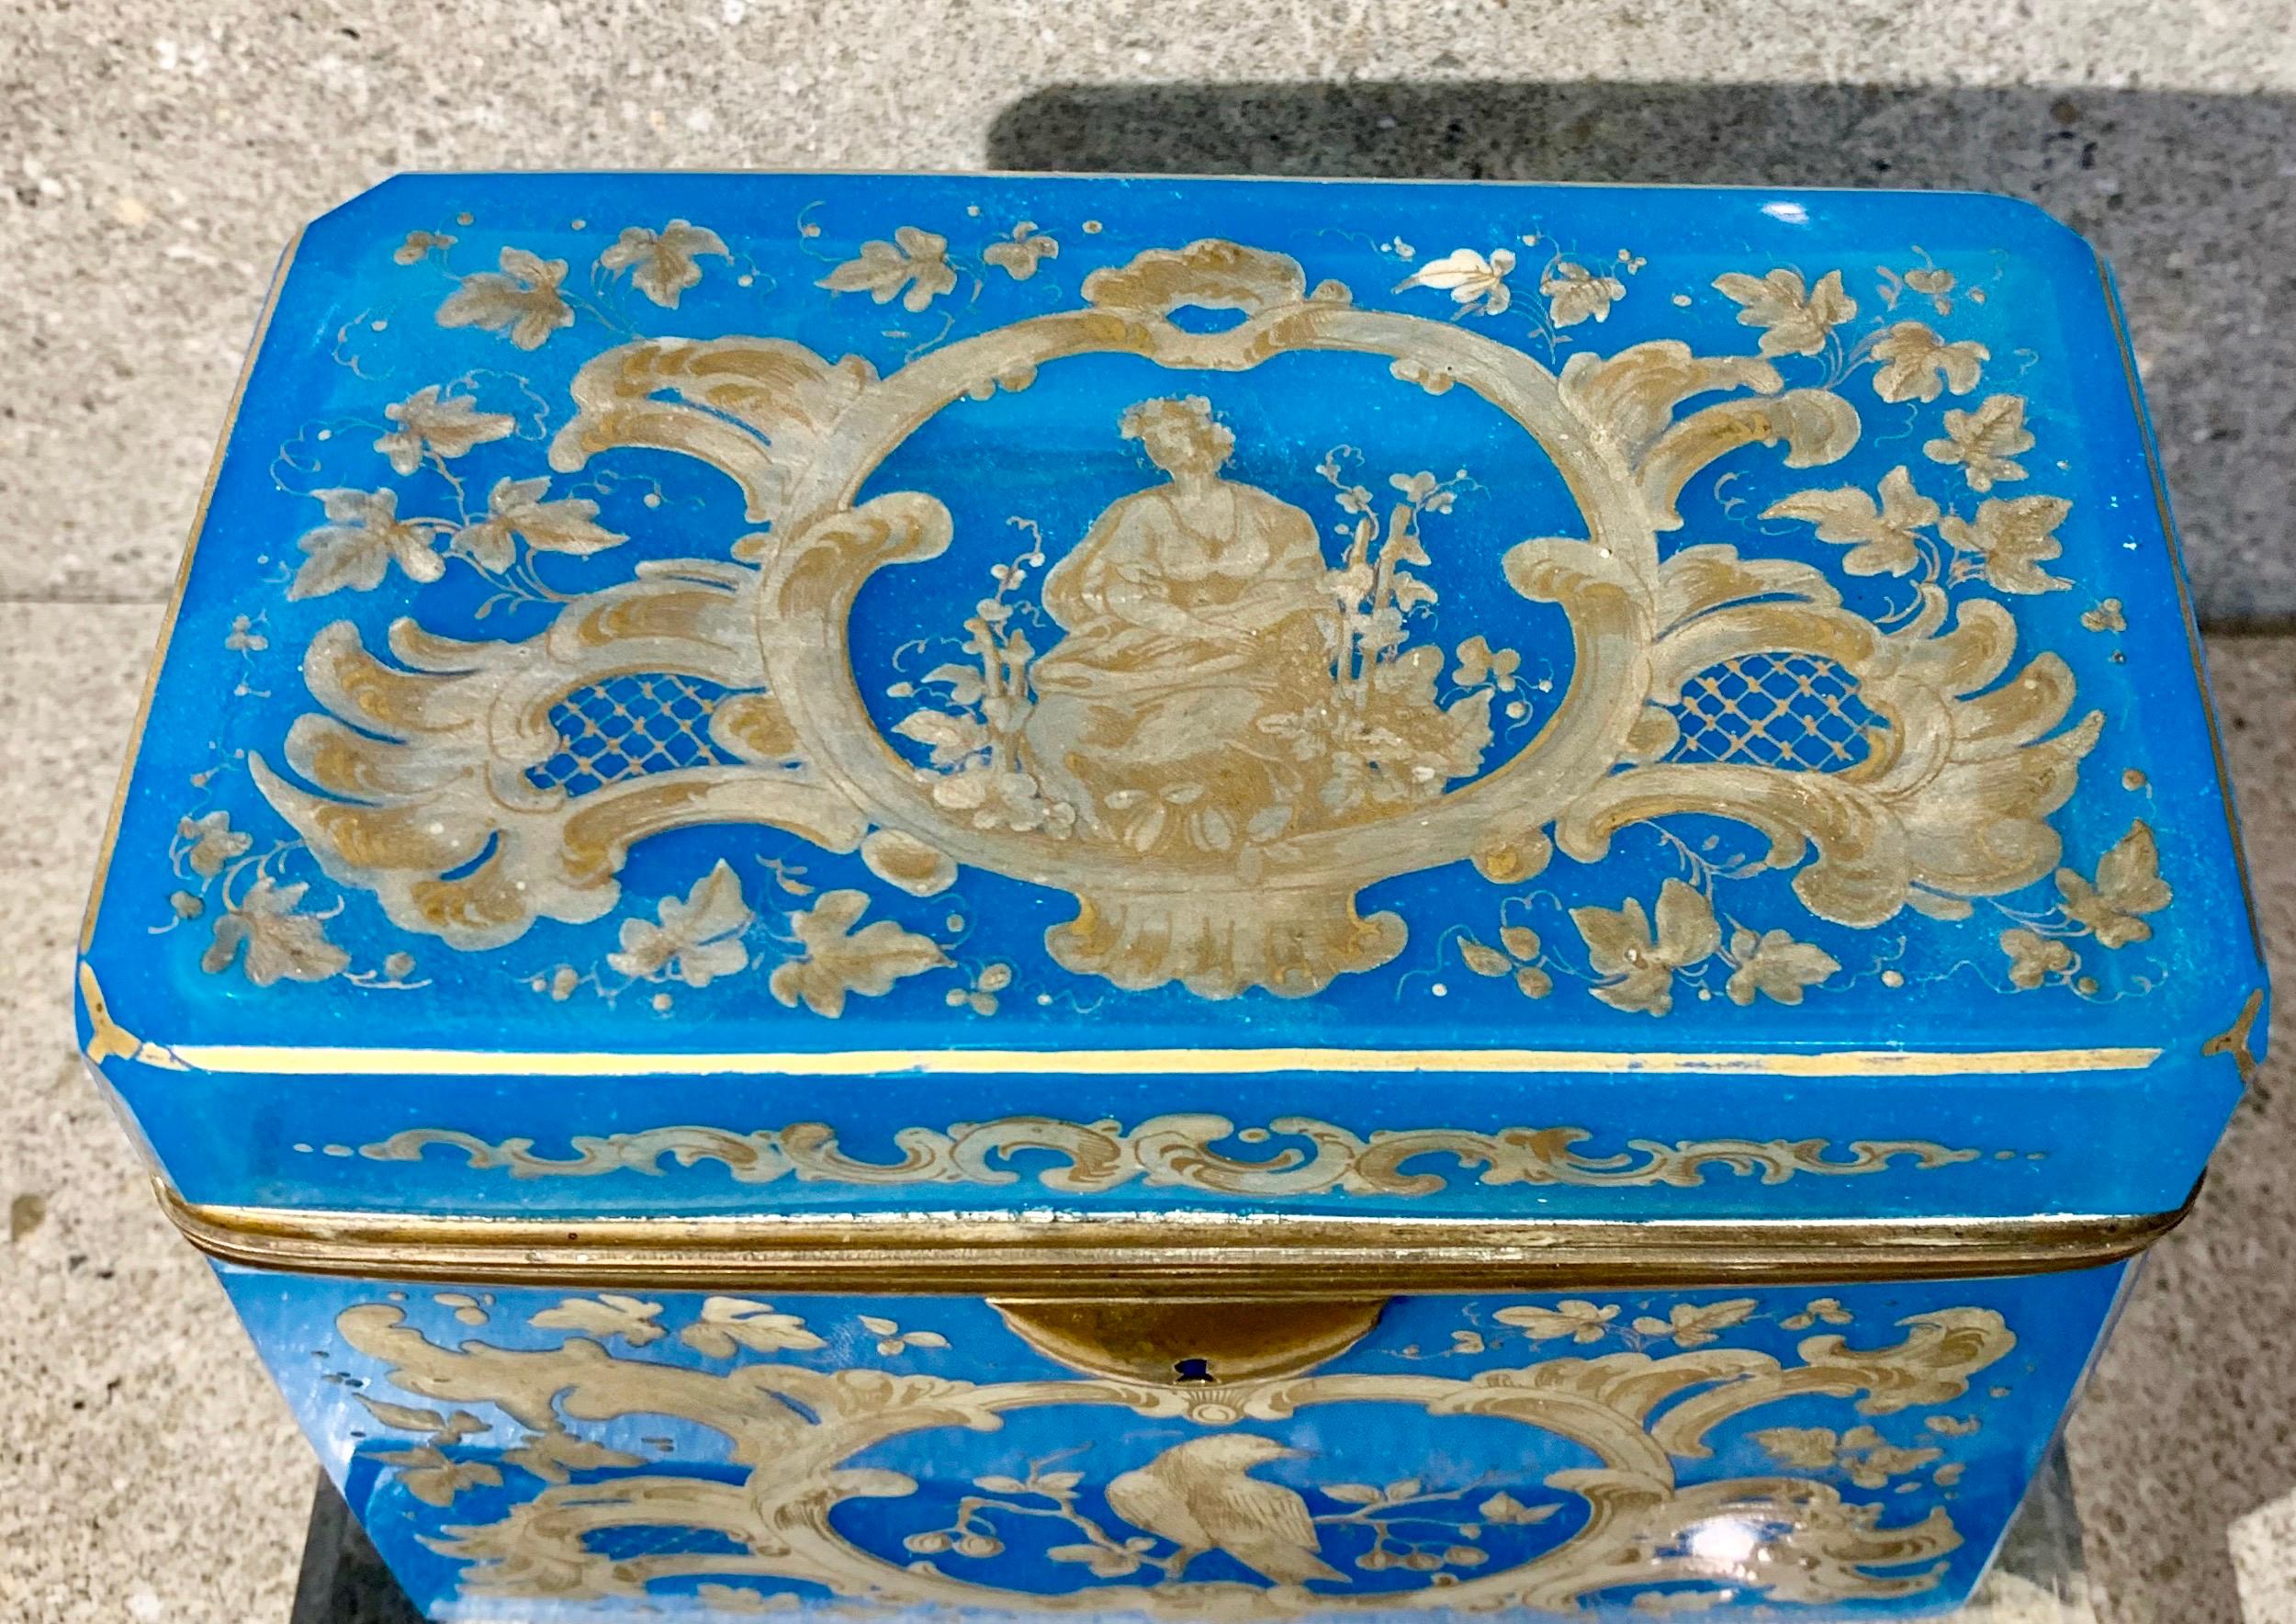 Made in Bohemia circa 1860
A heavy high quality casket skillfully hand enamelled with a floral decoration all over the top and sides. This box has a finely cast gilt bronze escutcheon and mounts.
The measurements are 6 Inches Wide by 4.5 Inches